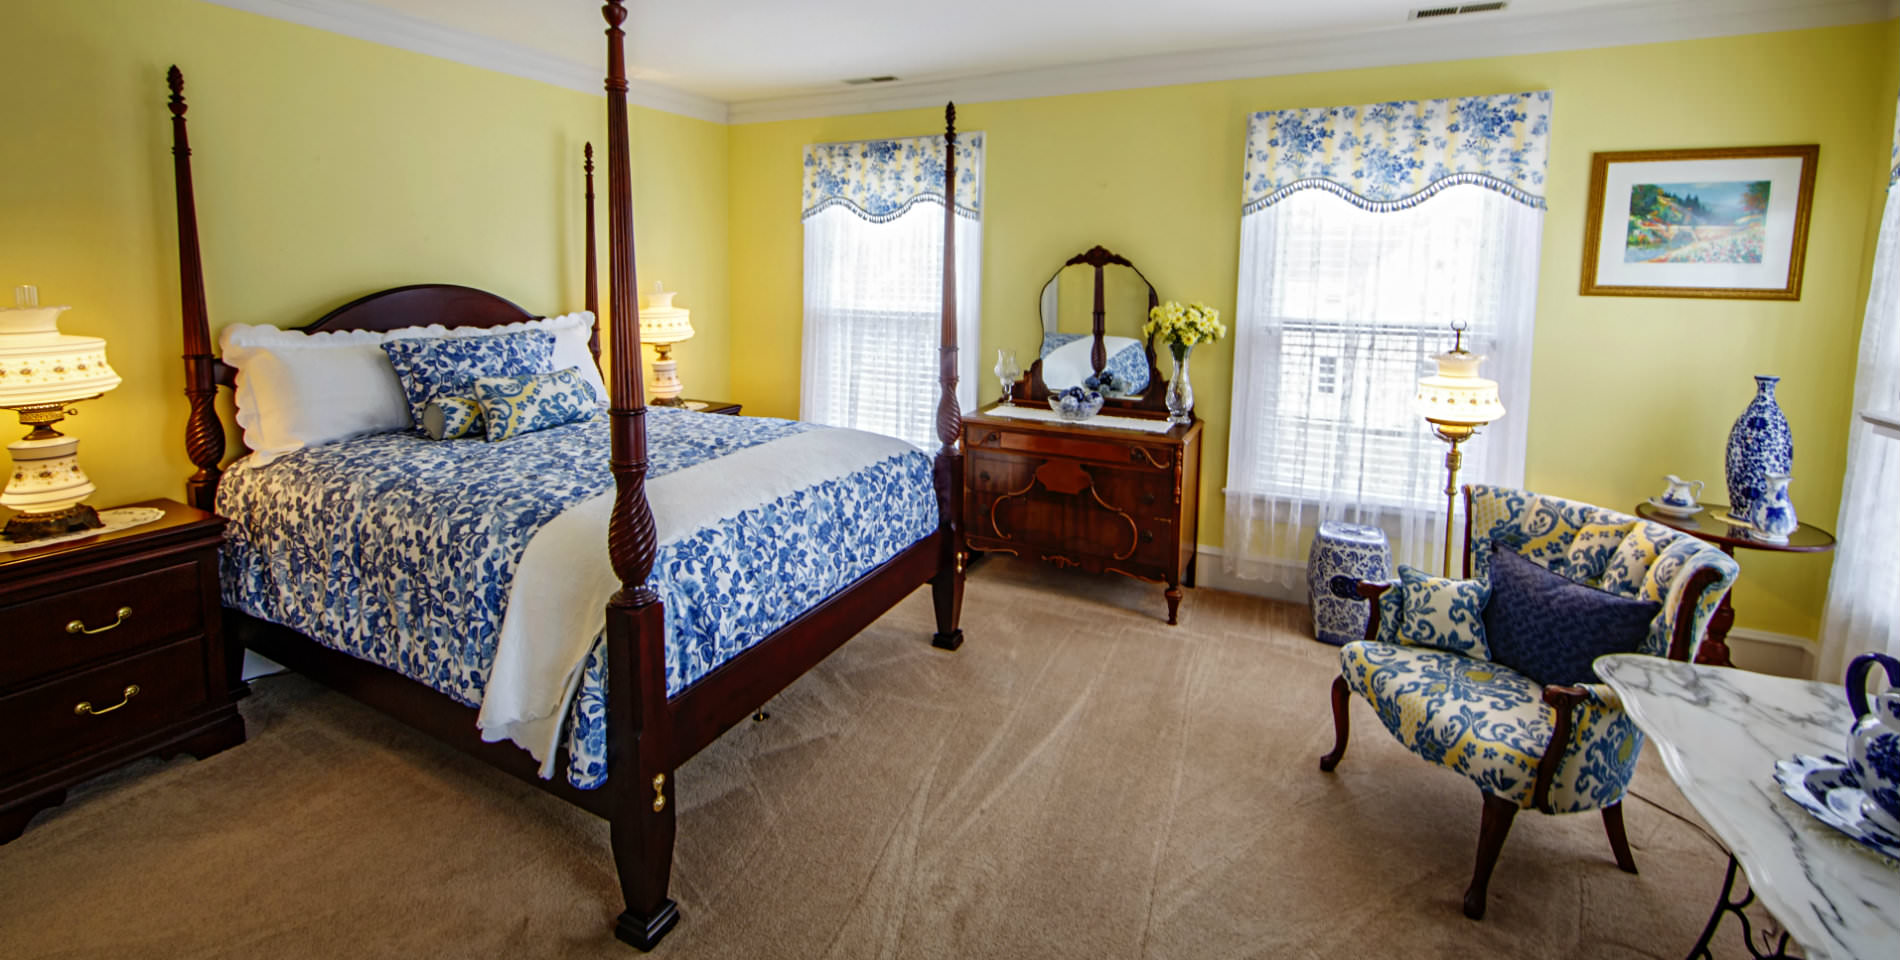 A four post wooden bed, blue and white bedspread, pillows and covered furniture set on a beige carpet with yellow walls. 